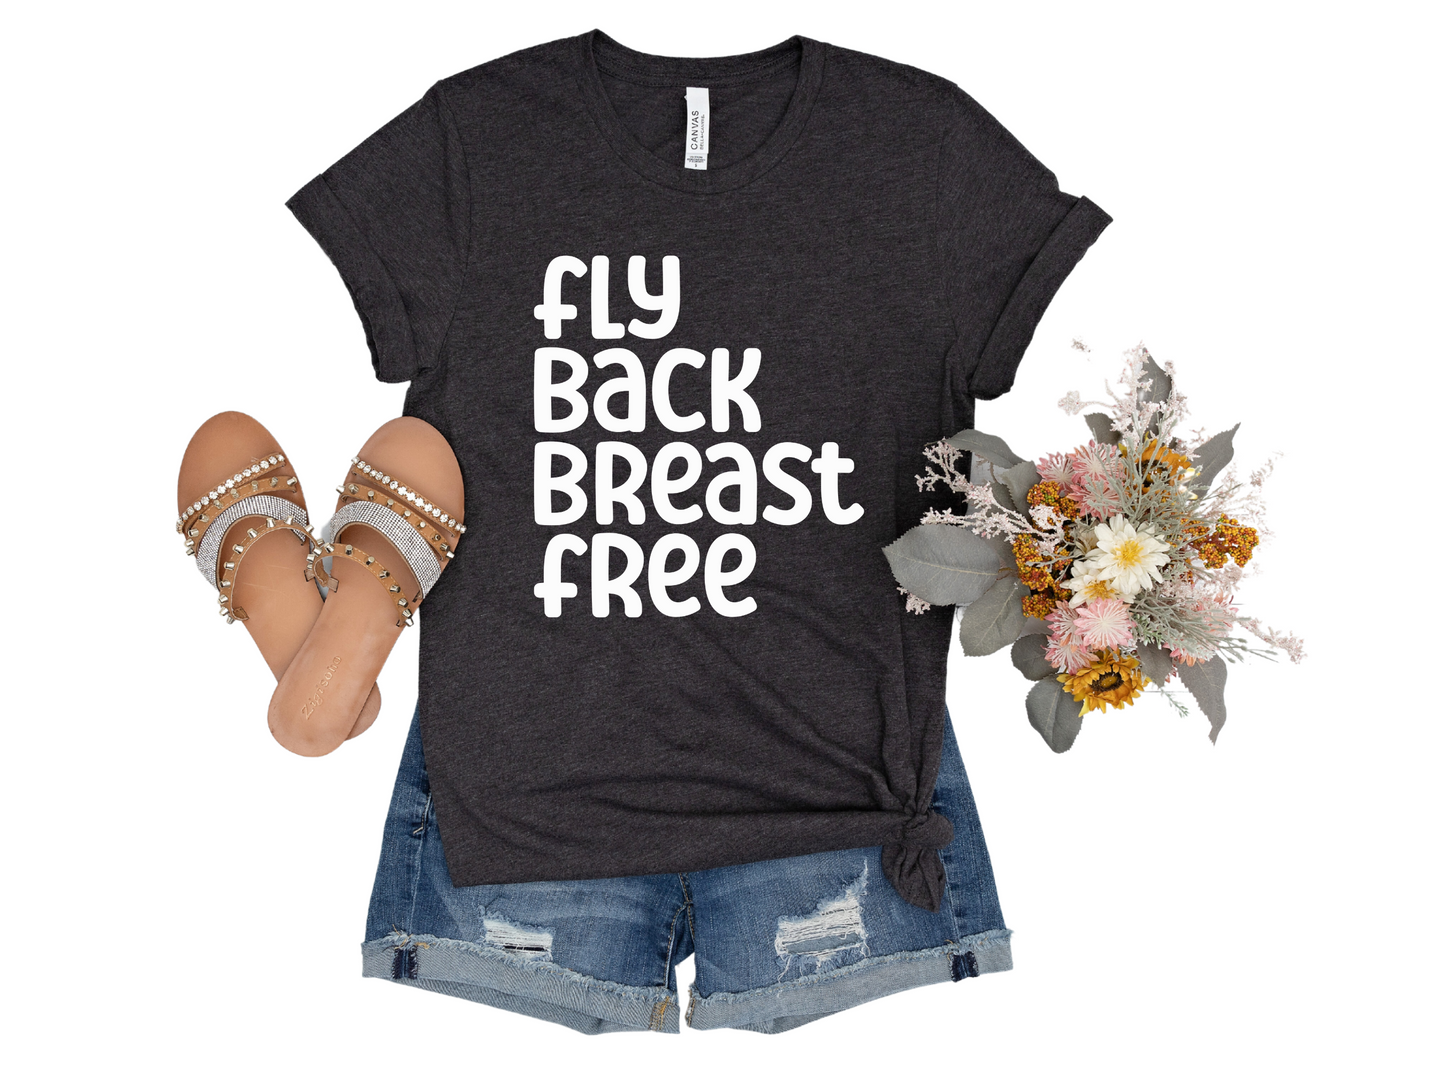 Fly. Back. Breast. Free.